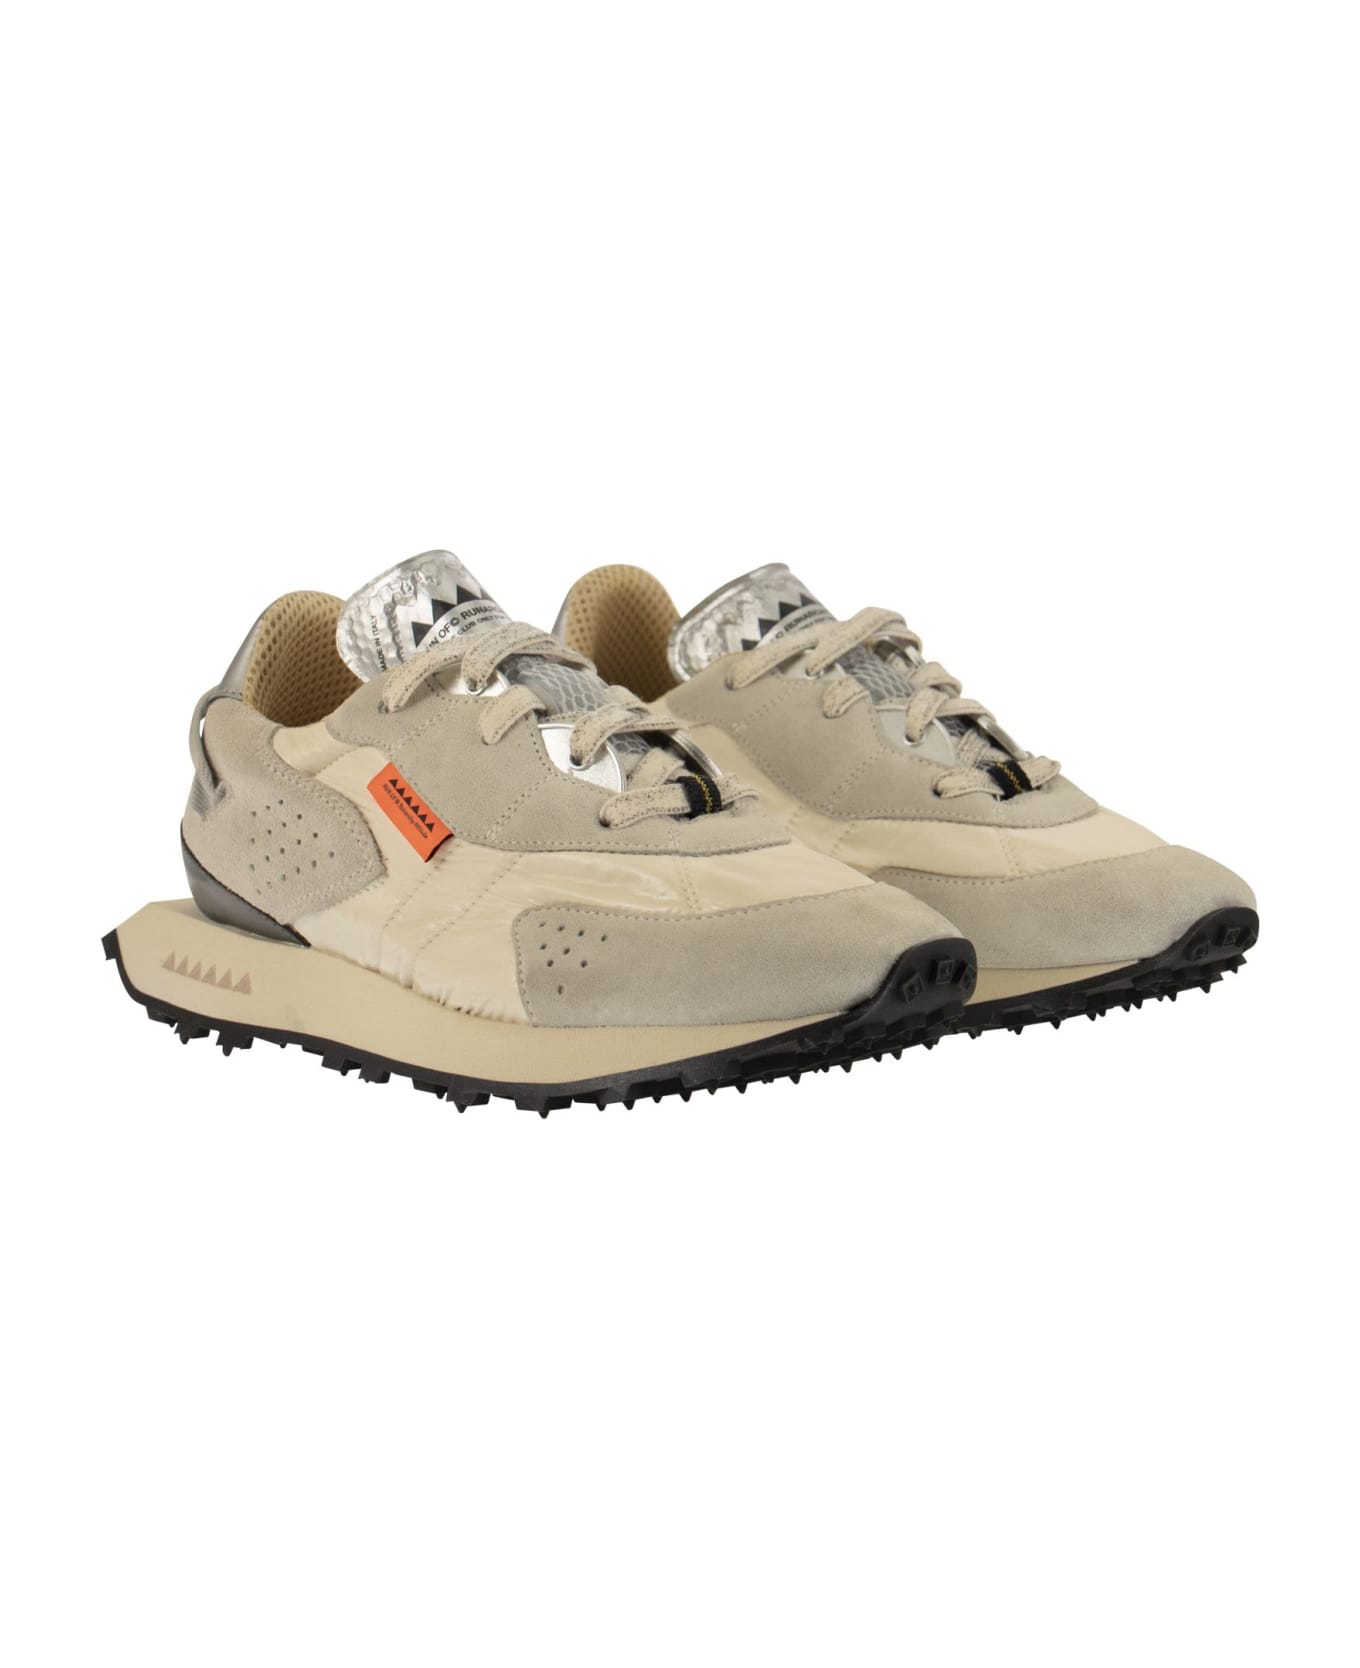 RUN OF Vaporix - Suede And Nylon Trainers - Sand